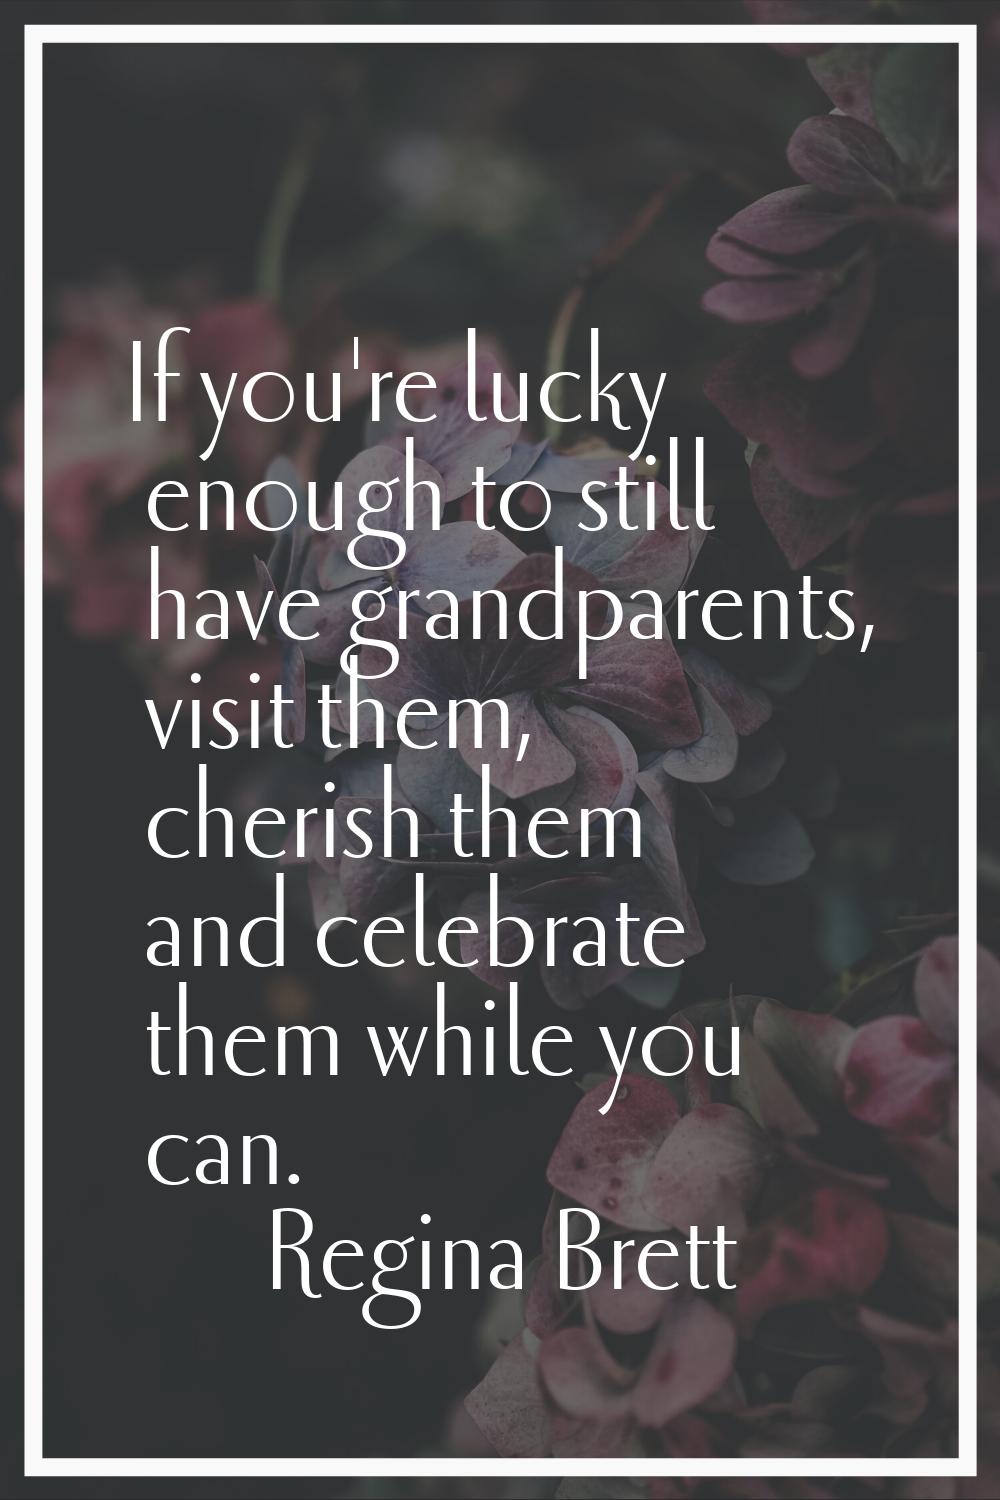 If you're lucky enough to still have grandparents, visit them, cherish them and celebrate them whil